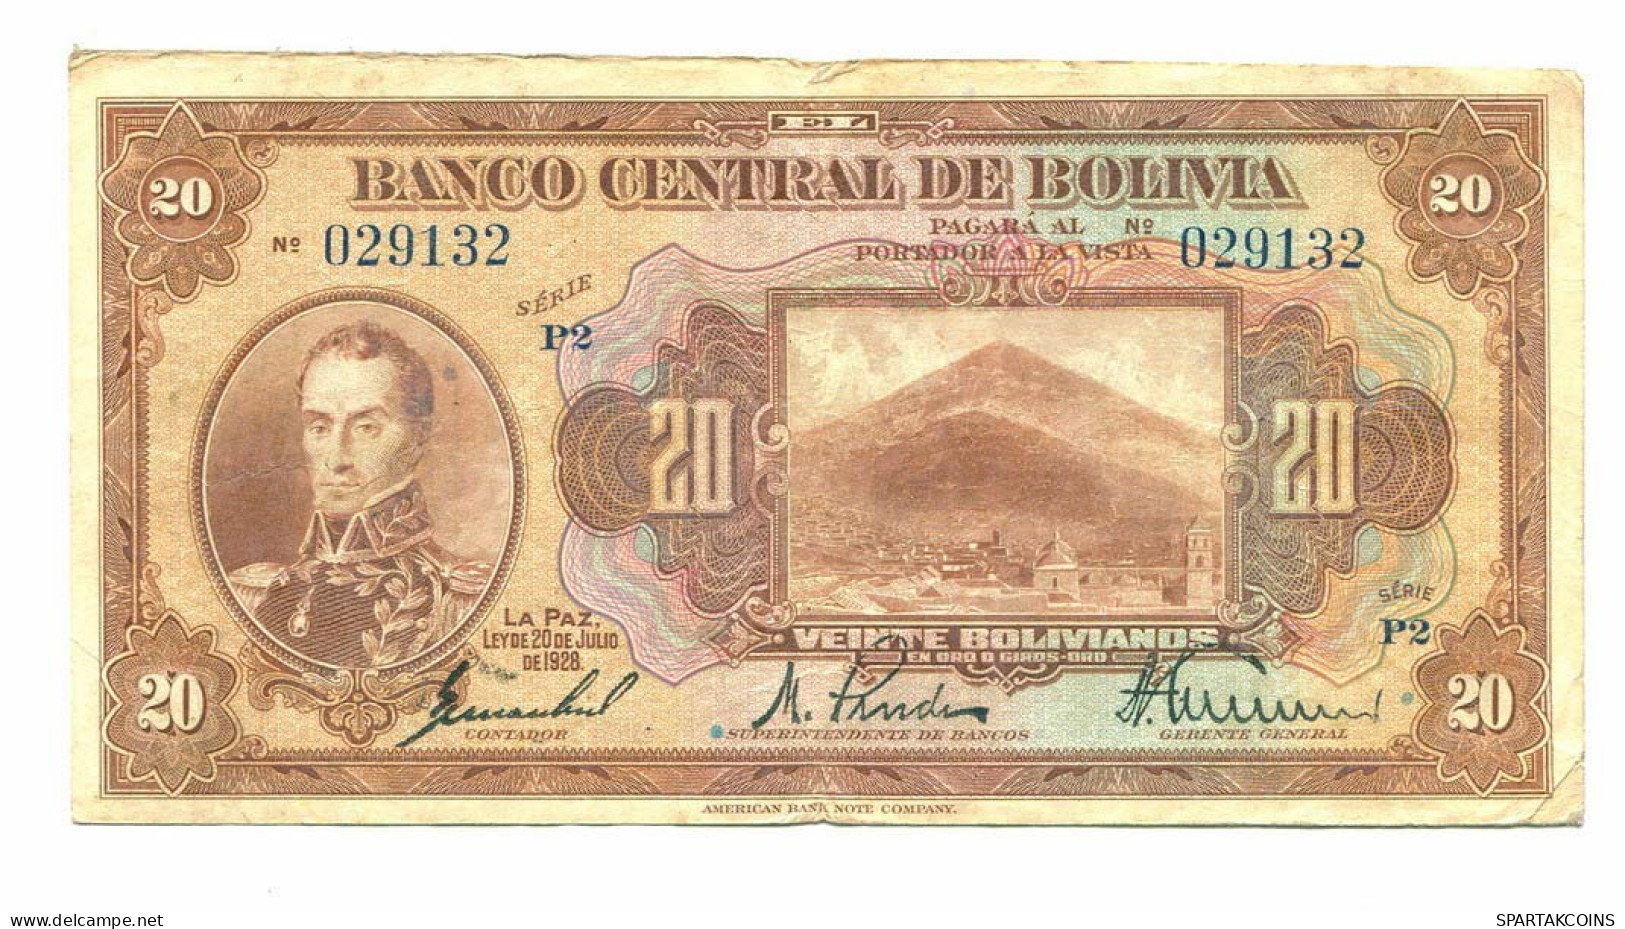 BOLIVIA 20 BOLIVIANOS 1928 SERIE P2 Paper Money Banknote #P10794.4 - [11] Emissions Locales